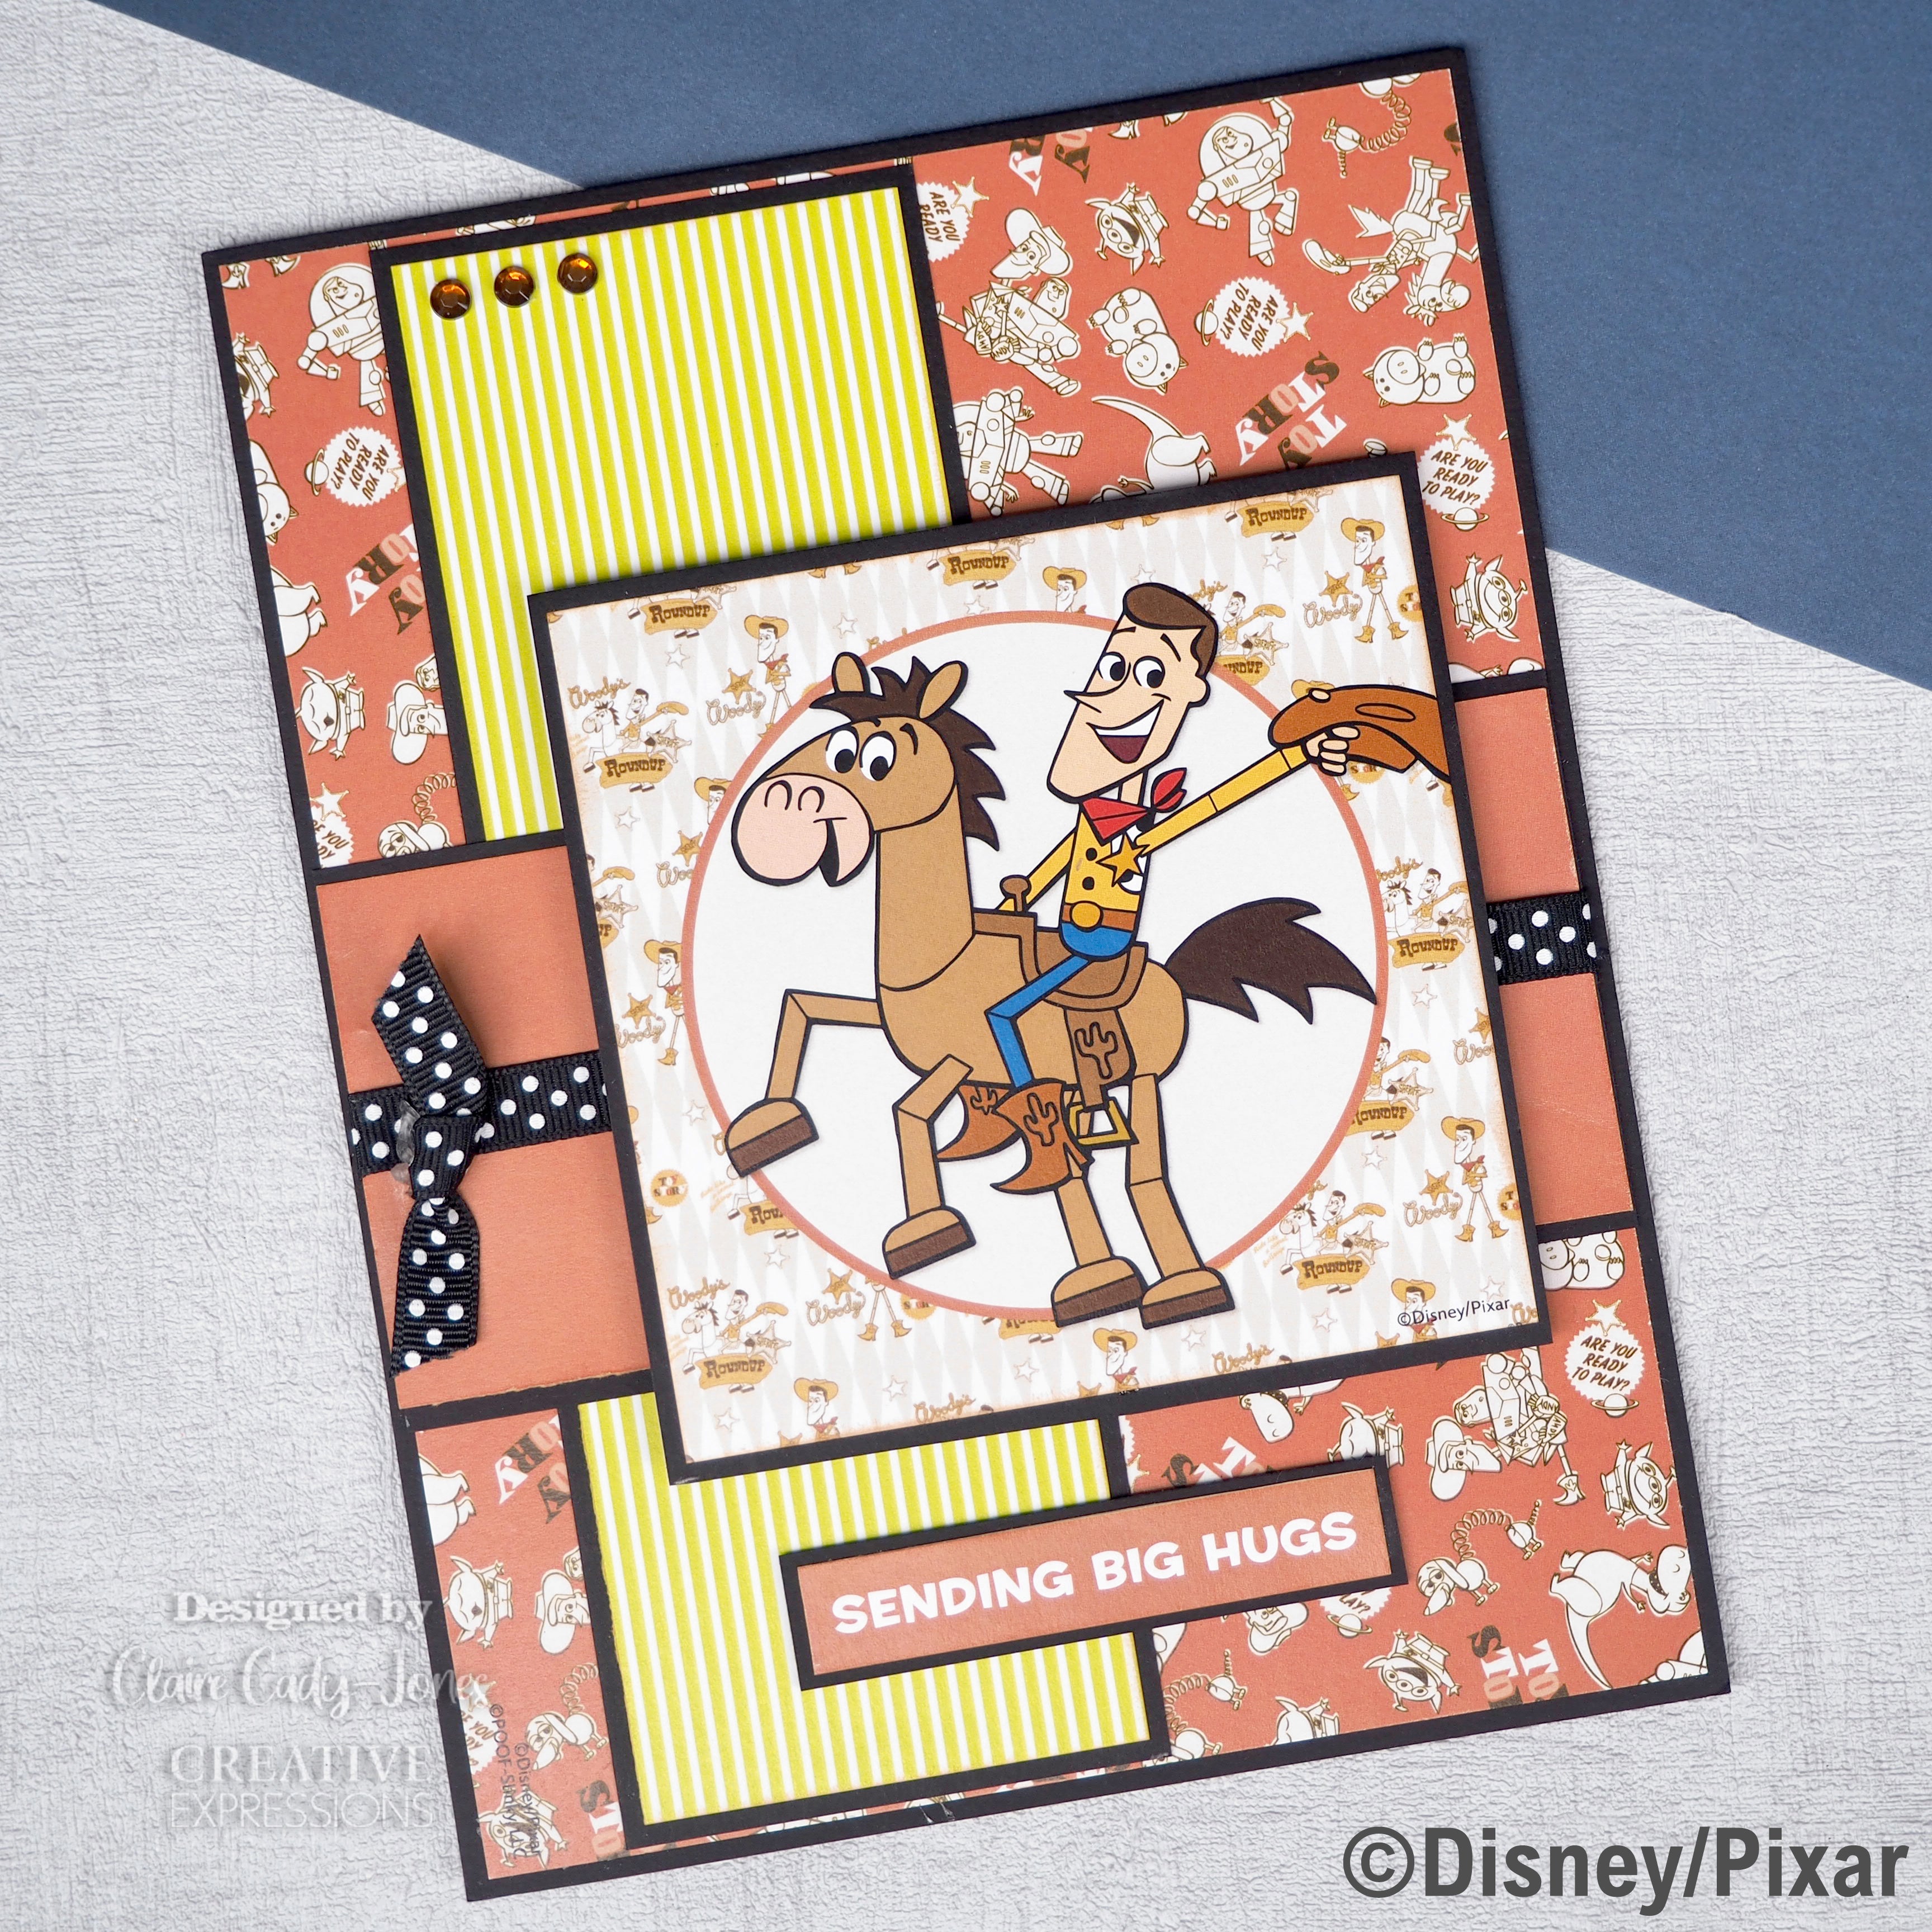 SCRAPBOOKING 101 - Scrapbook Ideas, Supplies and More, Disney Pages